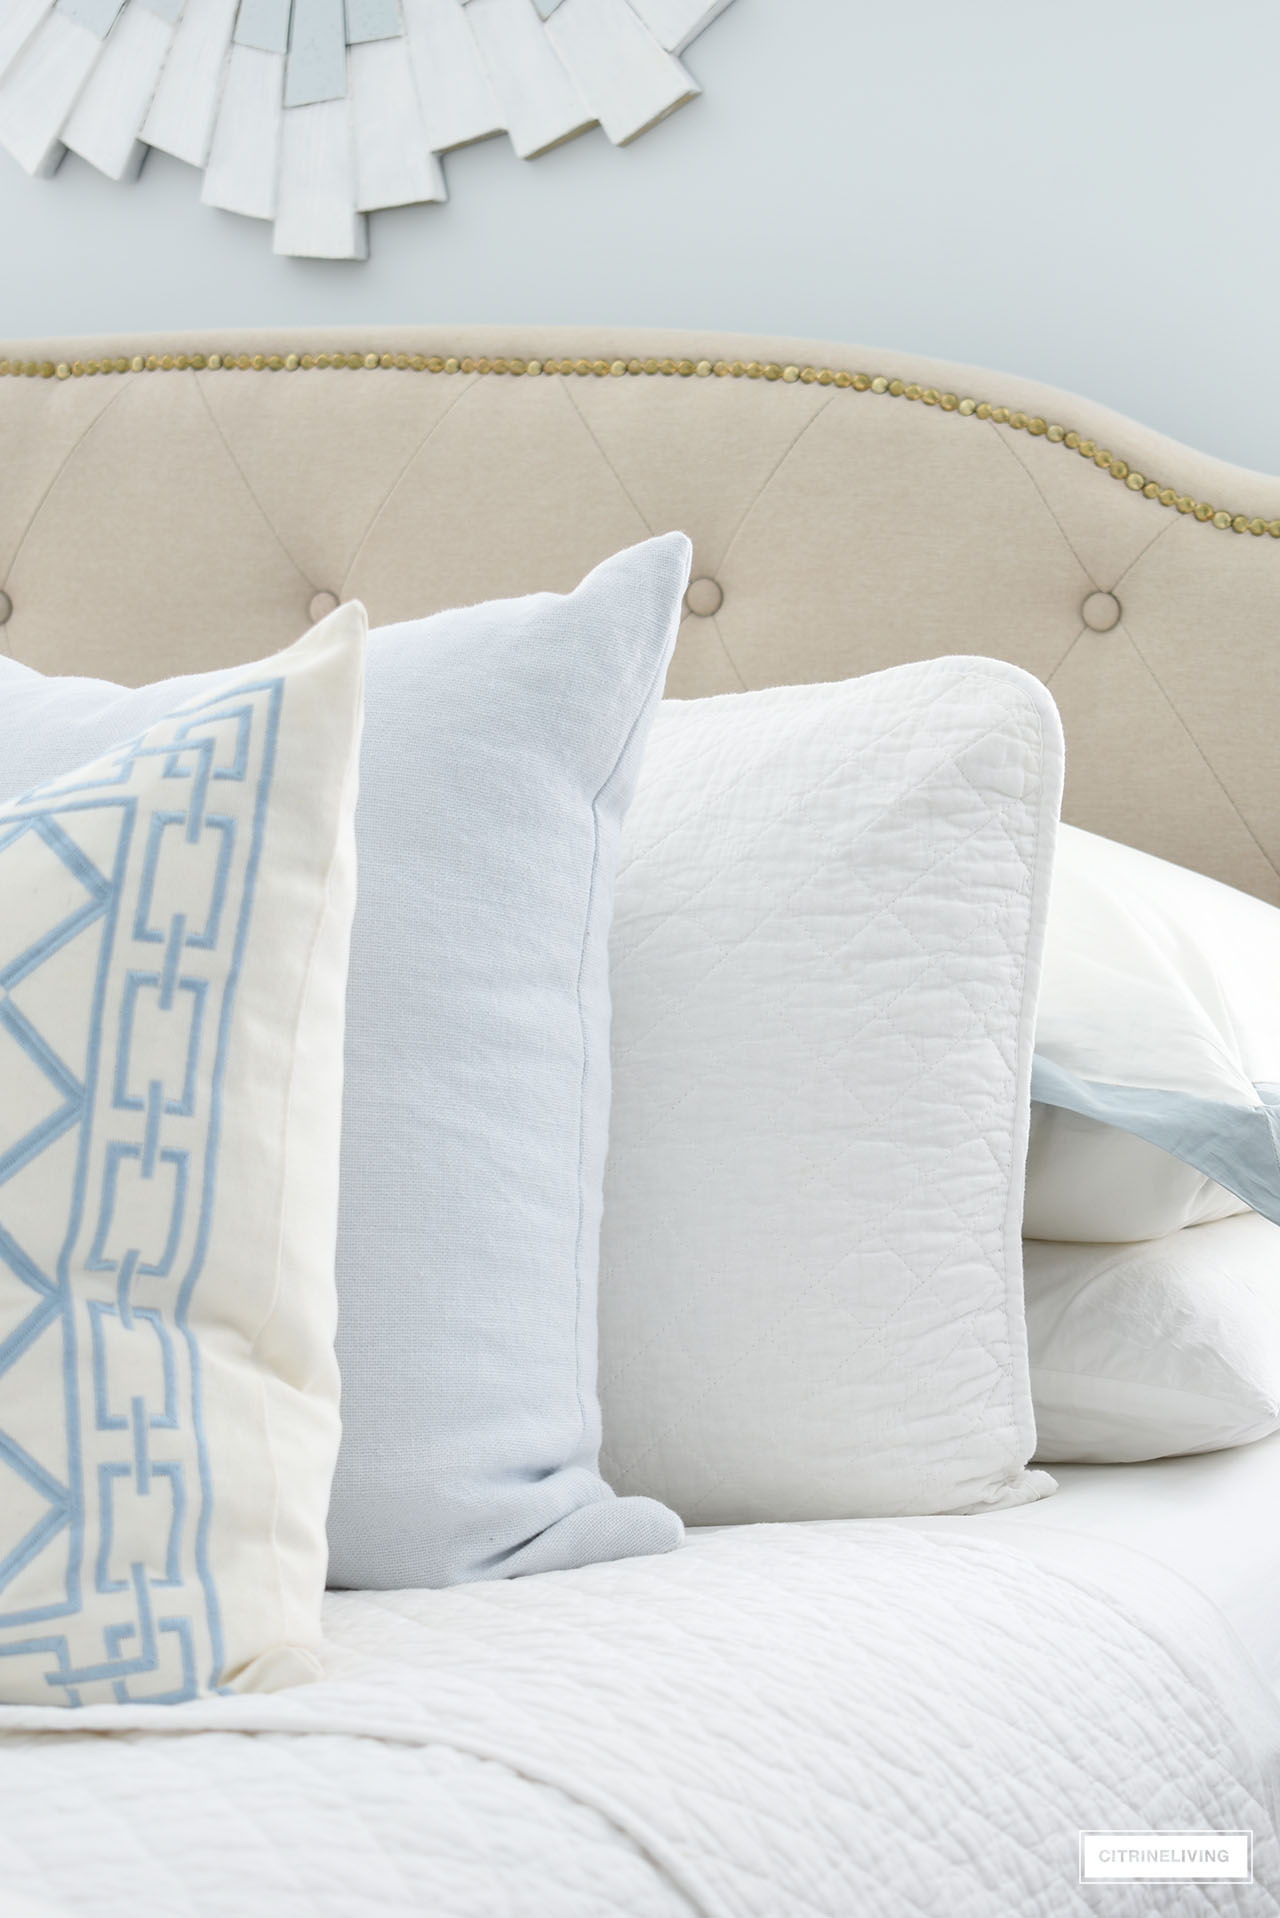 Layers of quilted bedding, white sheets and light blue throw pillows.